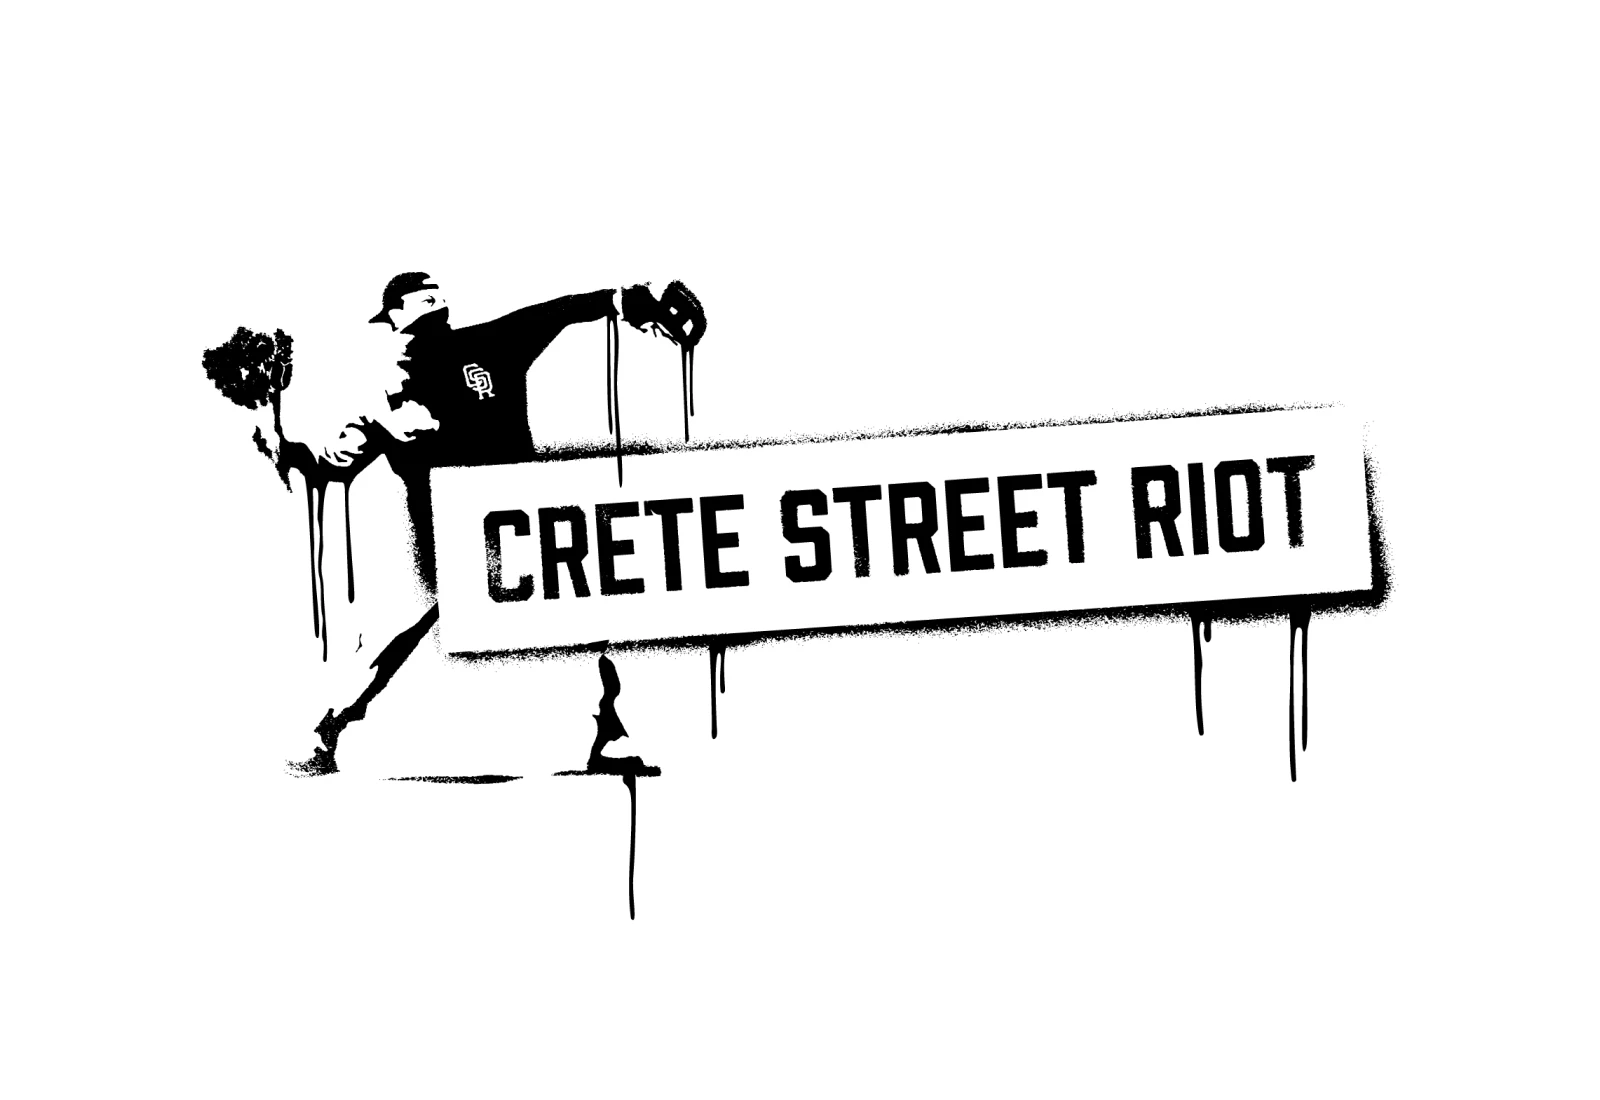 Crete St Riot stencil with a Banksy-spoof Flower Thrower in a spray paint stencil texture